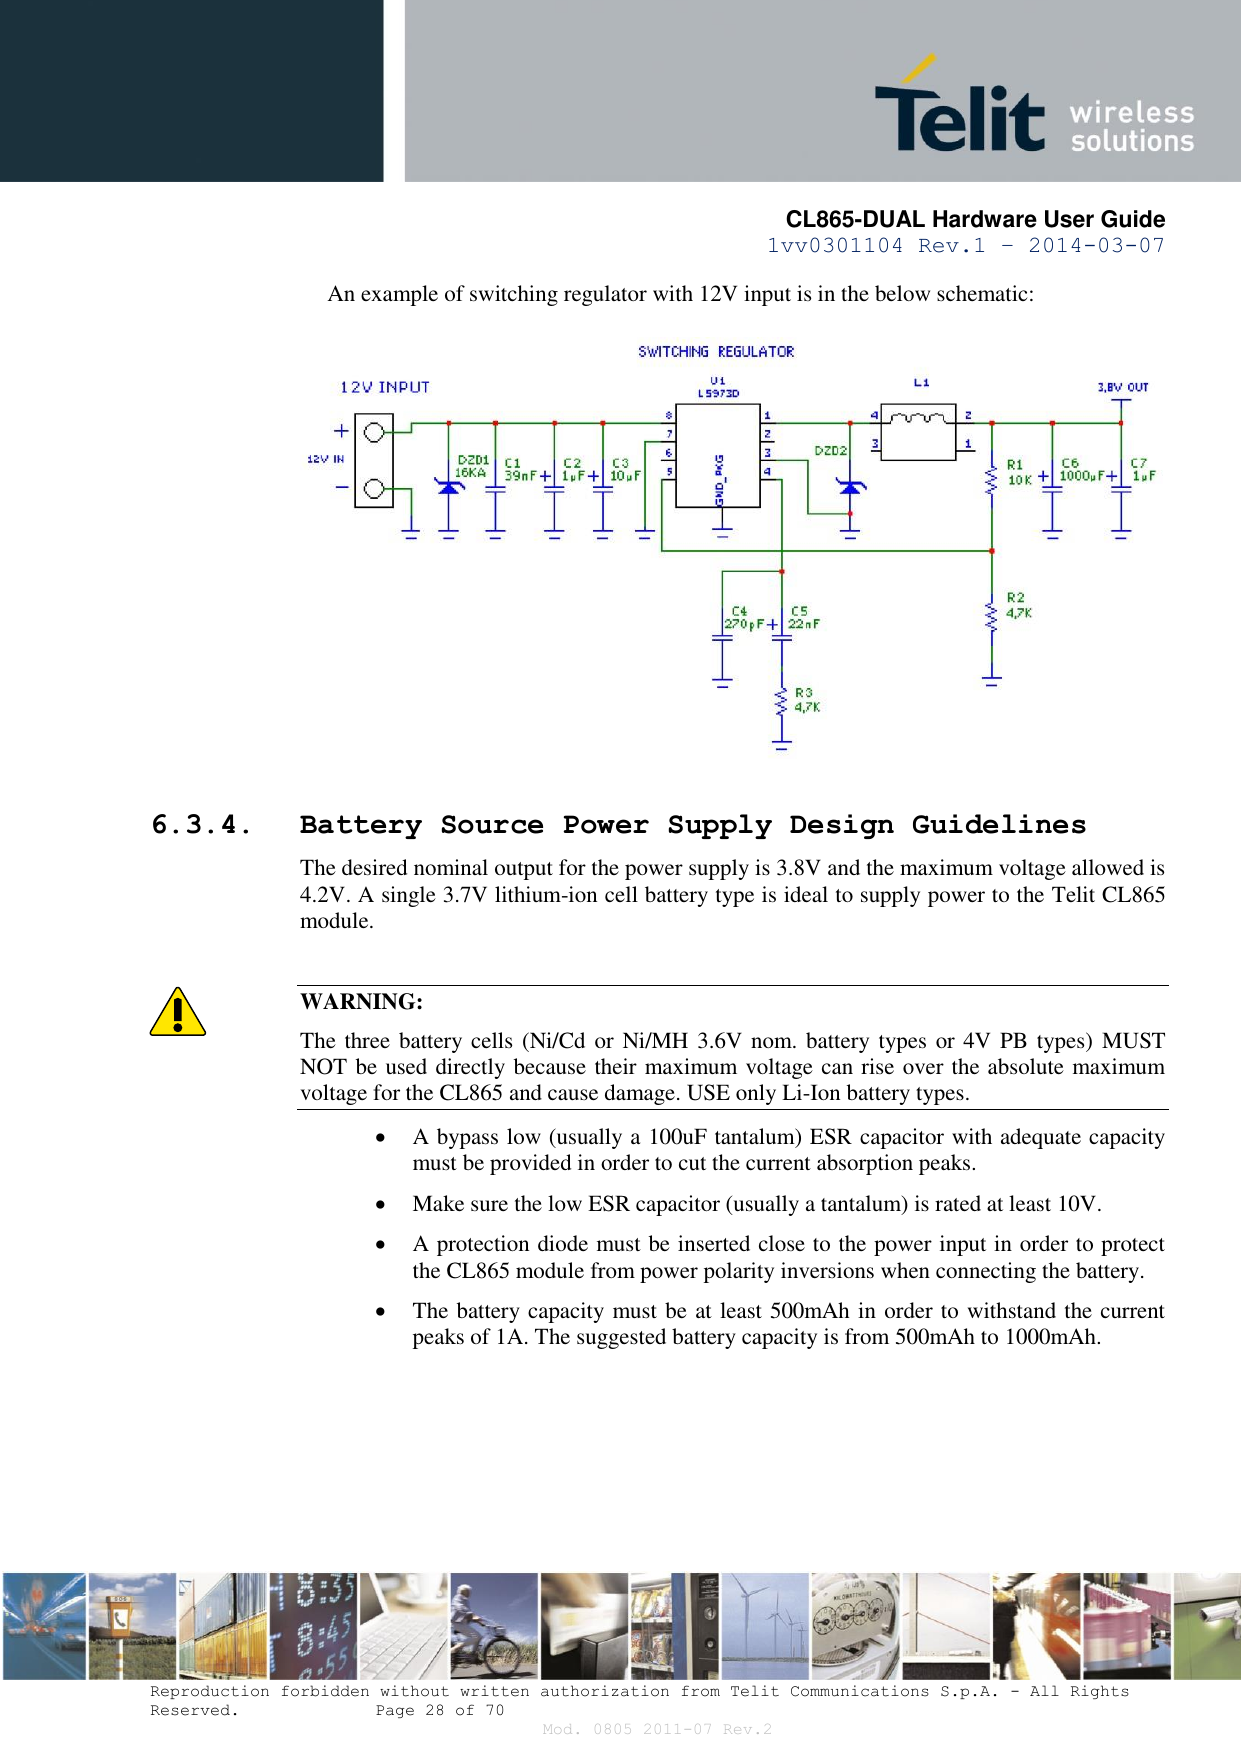       CL865-DUAL Hardware User Guide 1vv0301104 Rev.1 – 2014-03-07  Reproduction forbidden without written authorization from Telit Communications S.p.A. - All Rights Reserved.    Page 28 of 70 Mod. 0805 2011-07 Rev.2 An example of switching regulator with 12V input is in the below schematic:    6.3.4. Battery Source Power Supply Design Guidelines The desired nominal output for the power supply is 3.8V and the maximum voltage allowed is 4.2V. A single 3.7V lithium-ion cell battery type is ideal to supply power to the Telit CL865 module.  WARNING: The three battery cells (Ni/Cd or Ni/MH 3.6V nom. battery types or 4V PB types)  MUST NOT be used directly because their maximum voltage can rise over the absolute maximum voltage for the CL865 and cause damage. USE only Li-Ion battery types.  A bypass low (usually a 100uF tantalum) ESR capacitor with adequate capacity must be provided in order to cut the current absorption peaks.   Make sure the low ESR capacitor (usually a tantalum) is rated at least 10V.   A protection diode must be inserted close to the power input in order to protect the CL865 module from power polarity inversions when connecting the battery.  The battery capacity must be at least 500mAh in order to withstand the current peaks of 1A. The suggested battery capacity is from 500mAh to 1000mAh. 